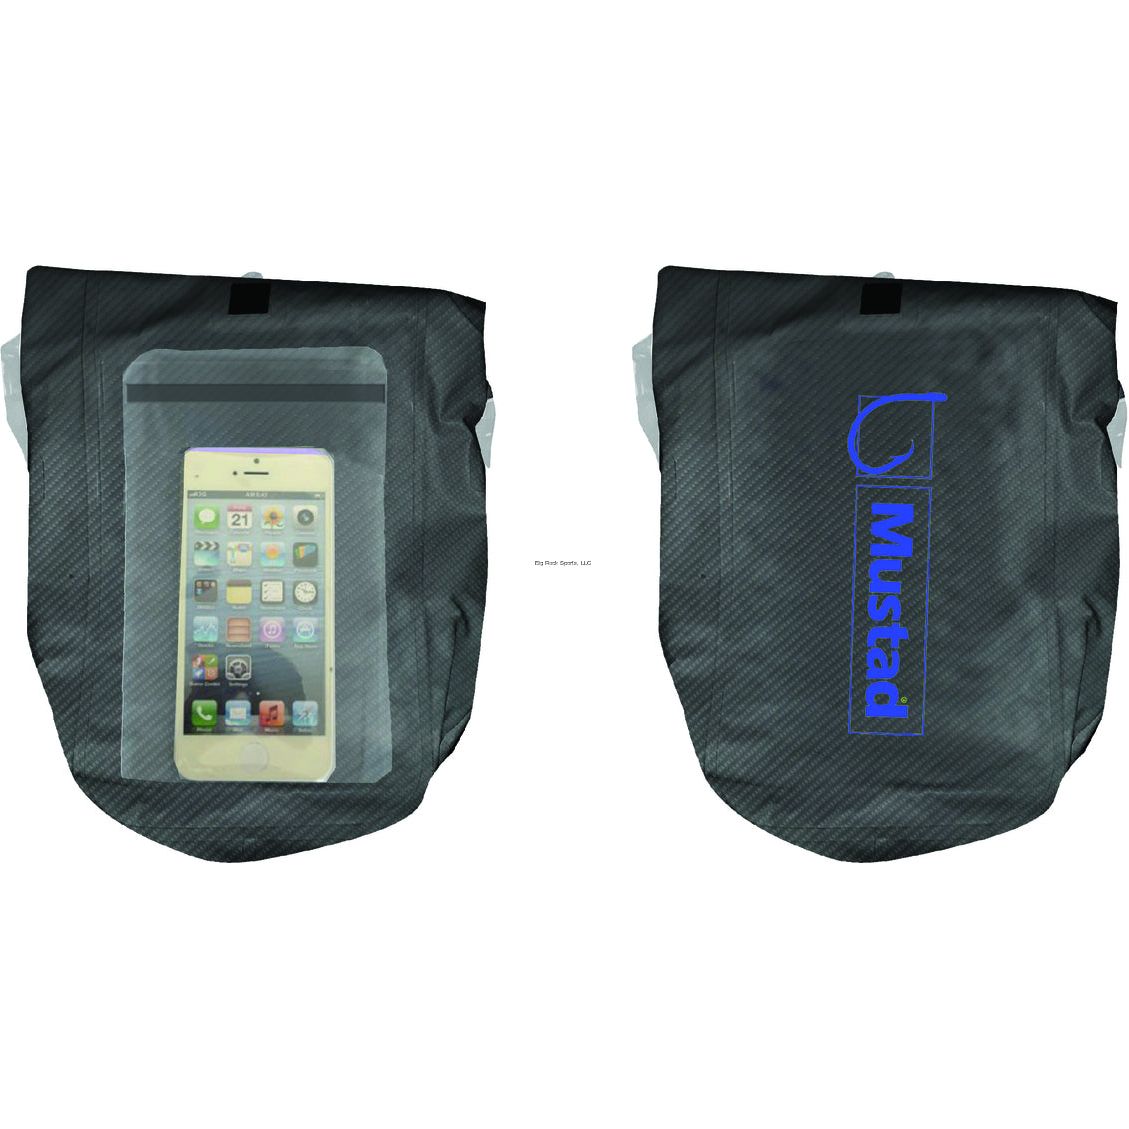 Mustad Dry Bag 2-3 Liter w/ Phone Pouch